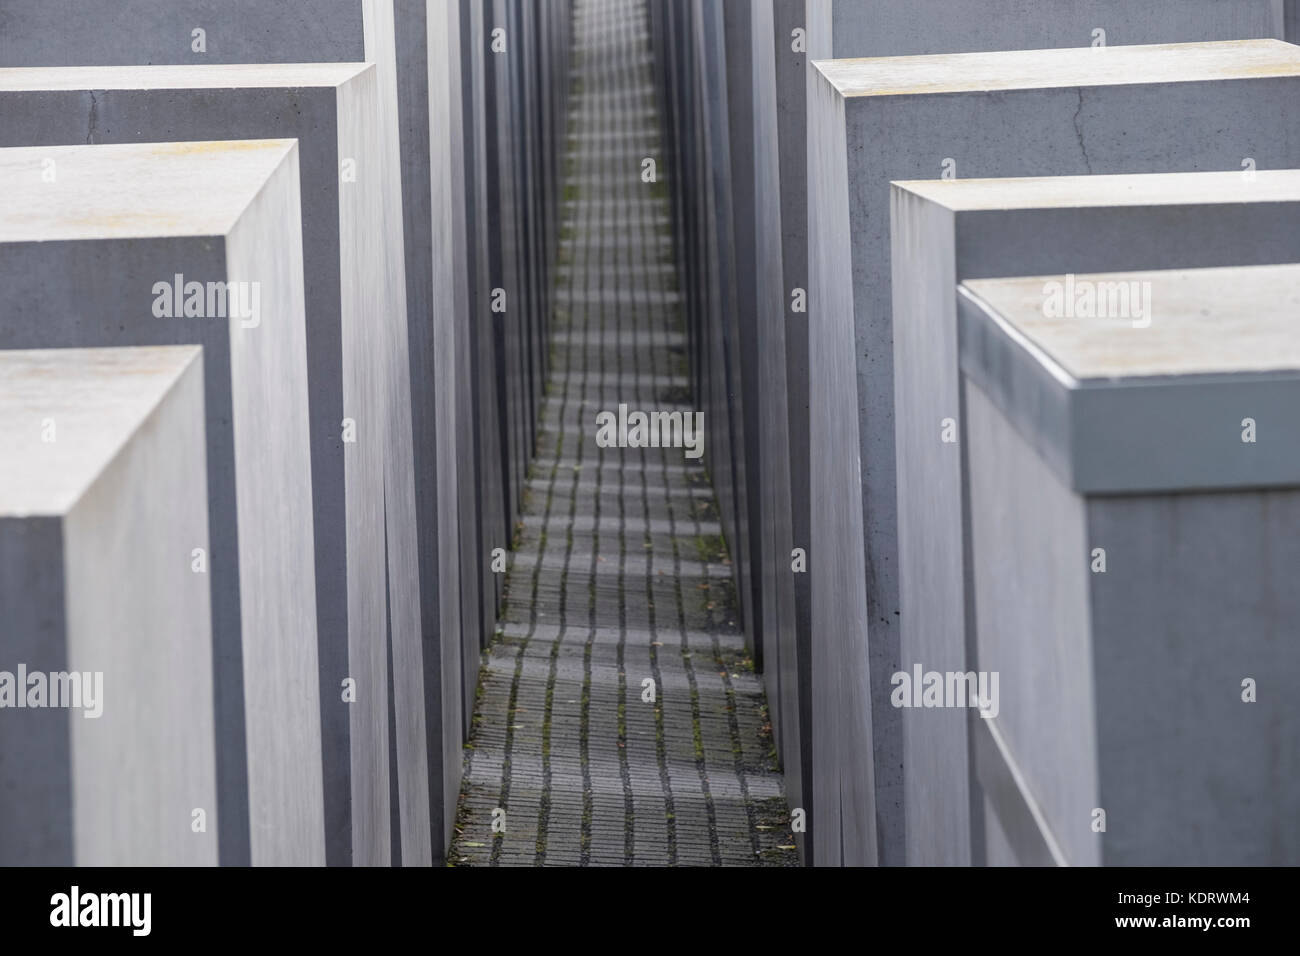 The Jewish Holocaust memorial in the centre of Berlin, Germany Stock Photo